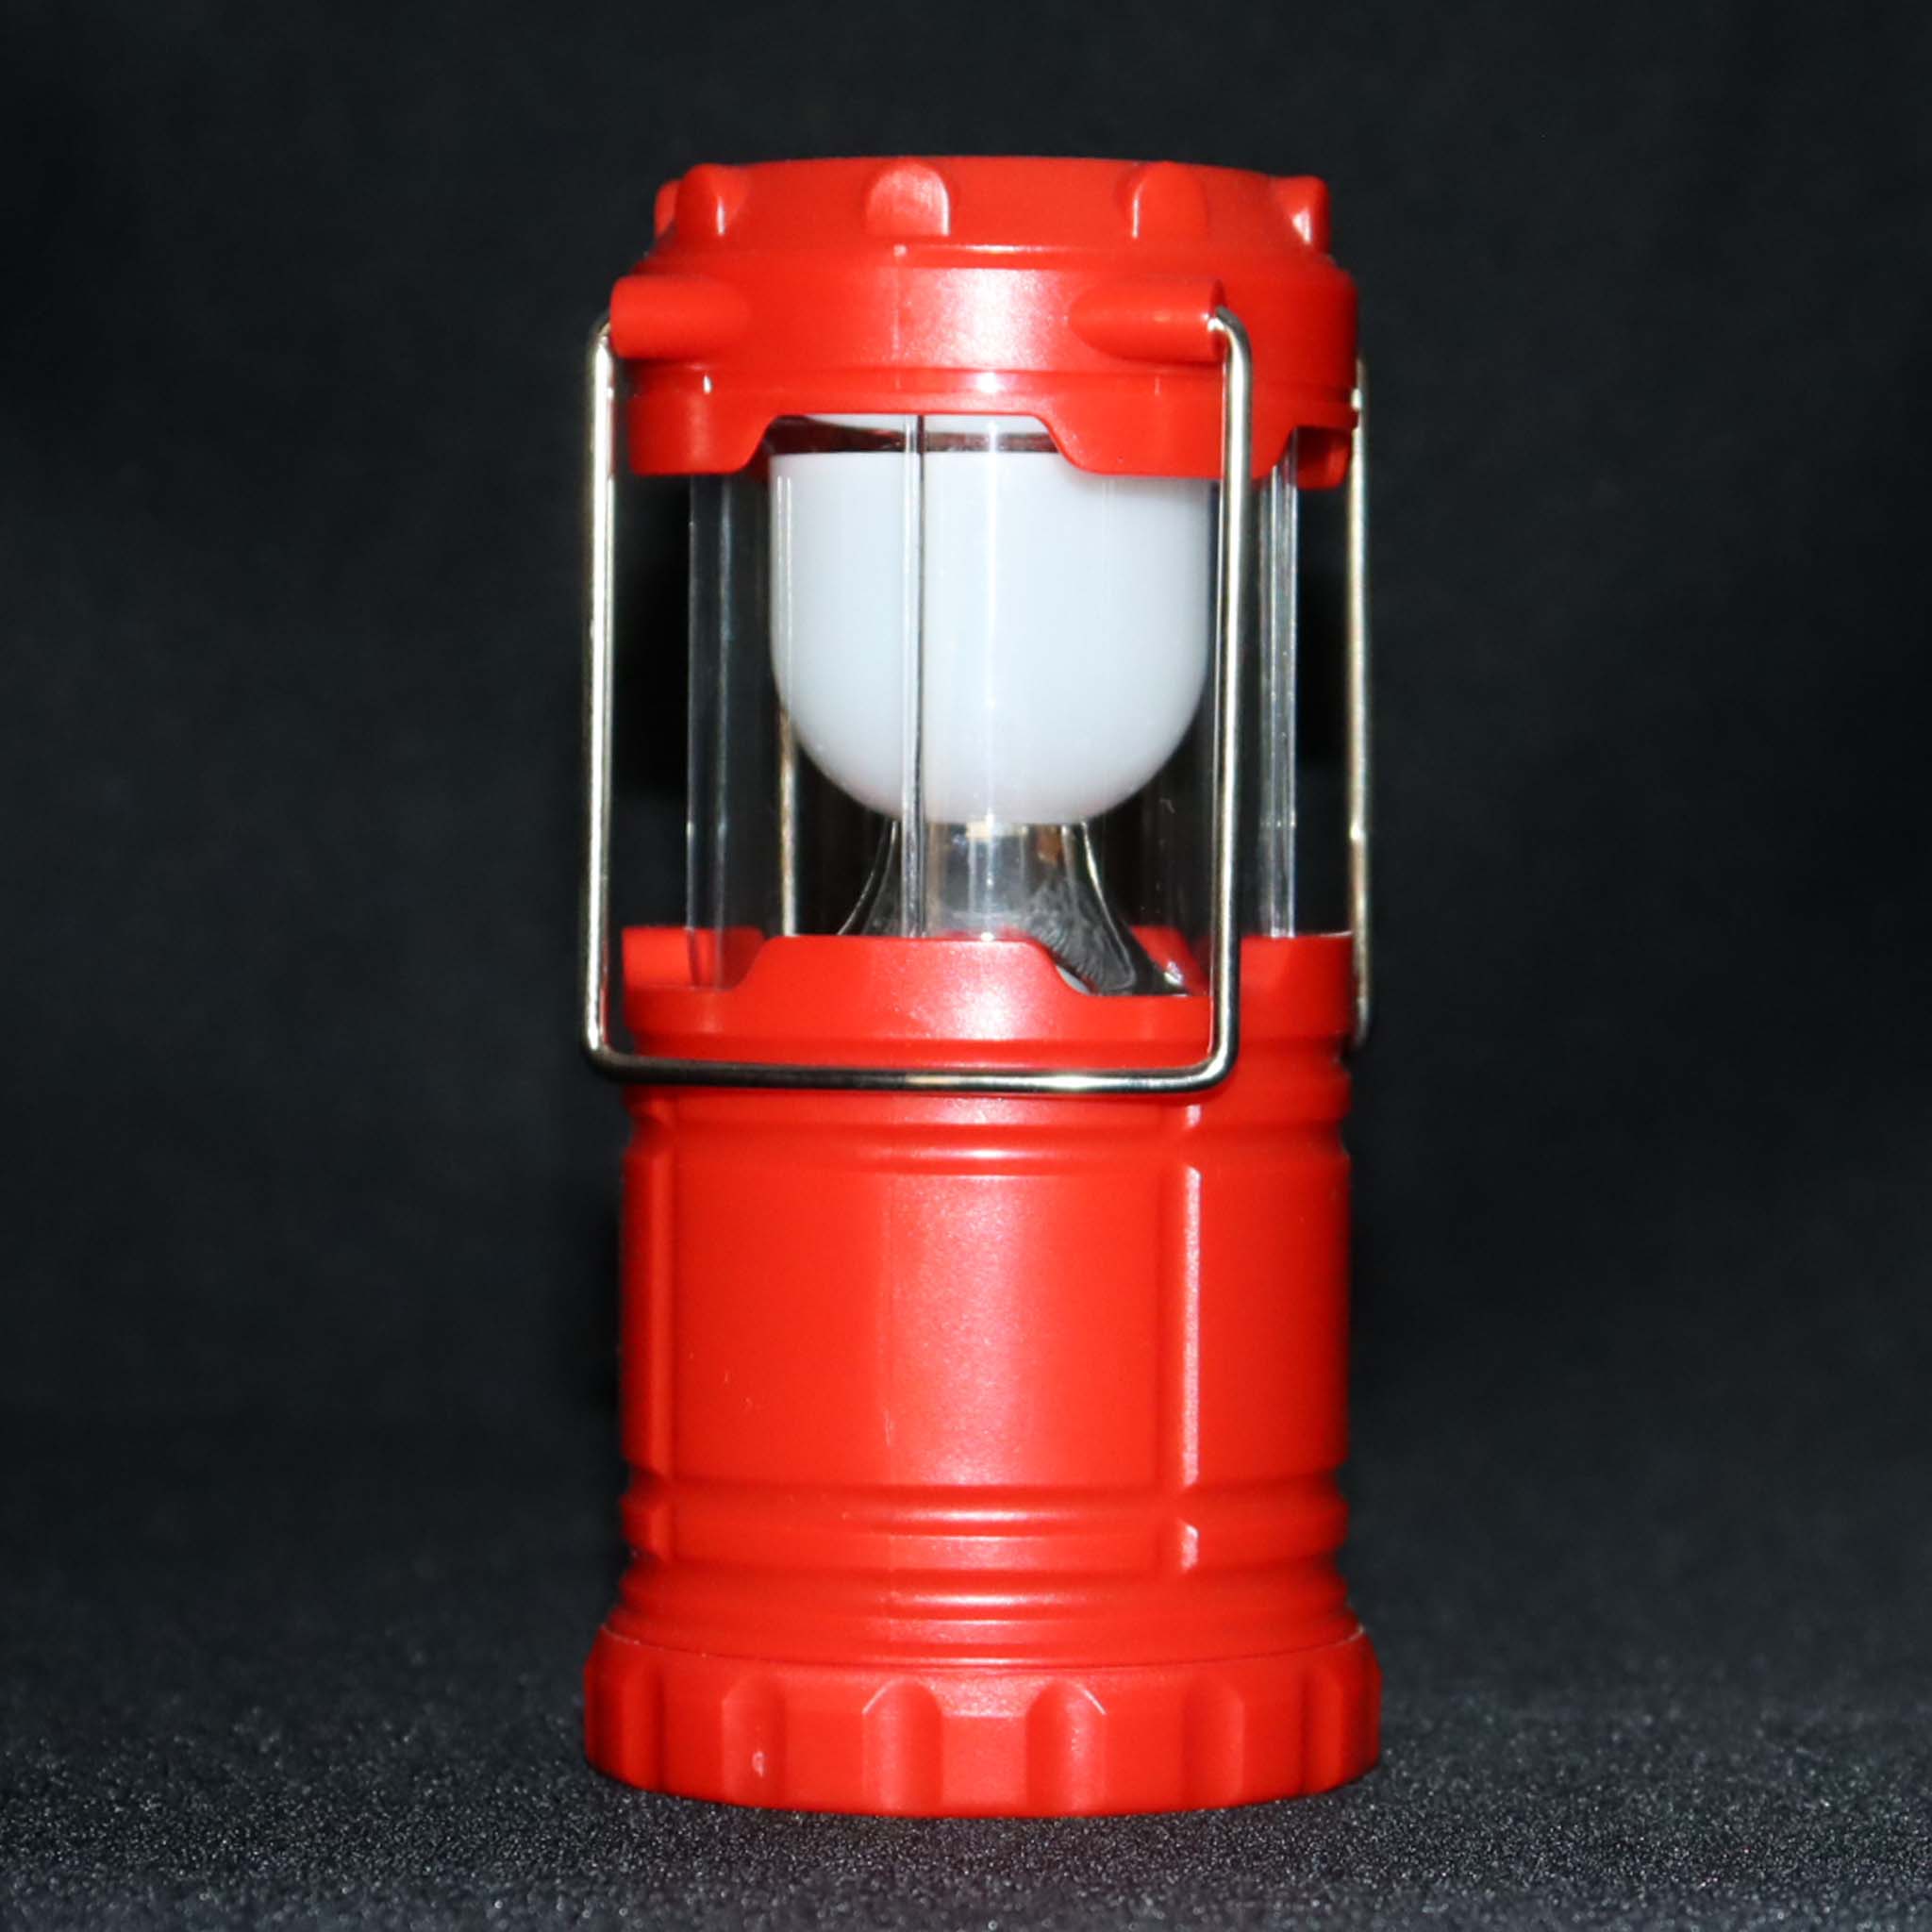 Camp Battery Operated Lanterns – Camp Grant Walker 4-H Store